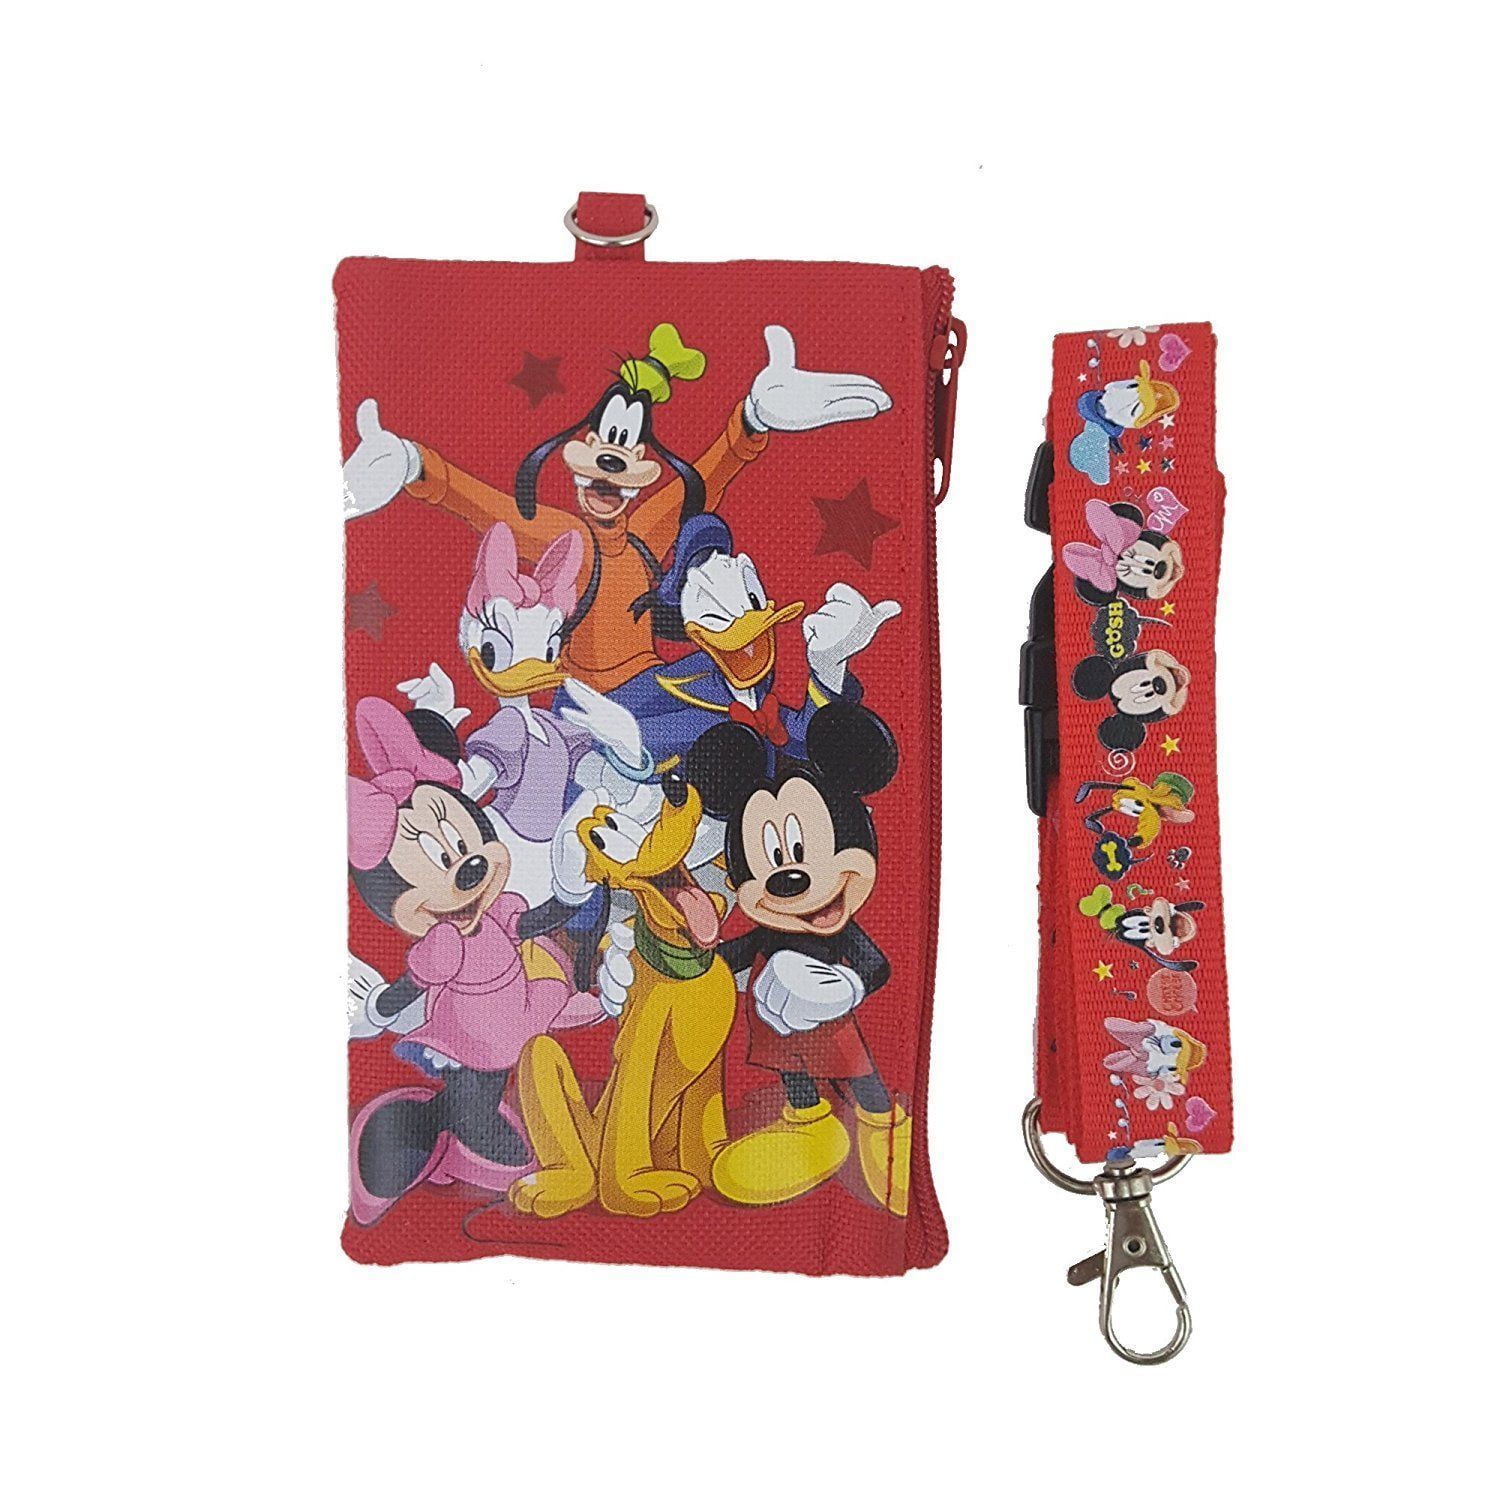 NEW Disney Lanyard Set 3 Mickey Minnie Mouse & Friends Lanyards With Coin Purse